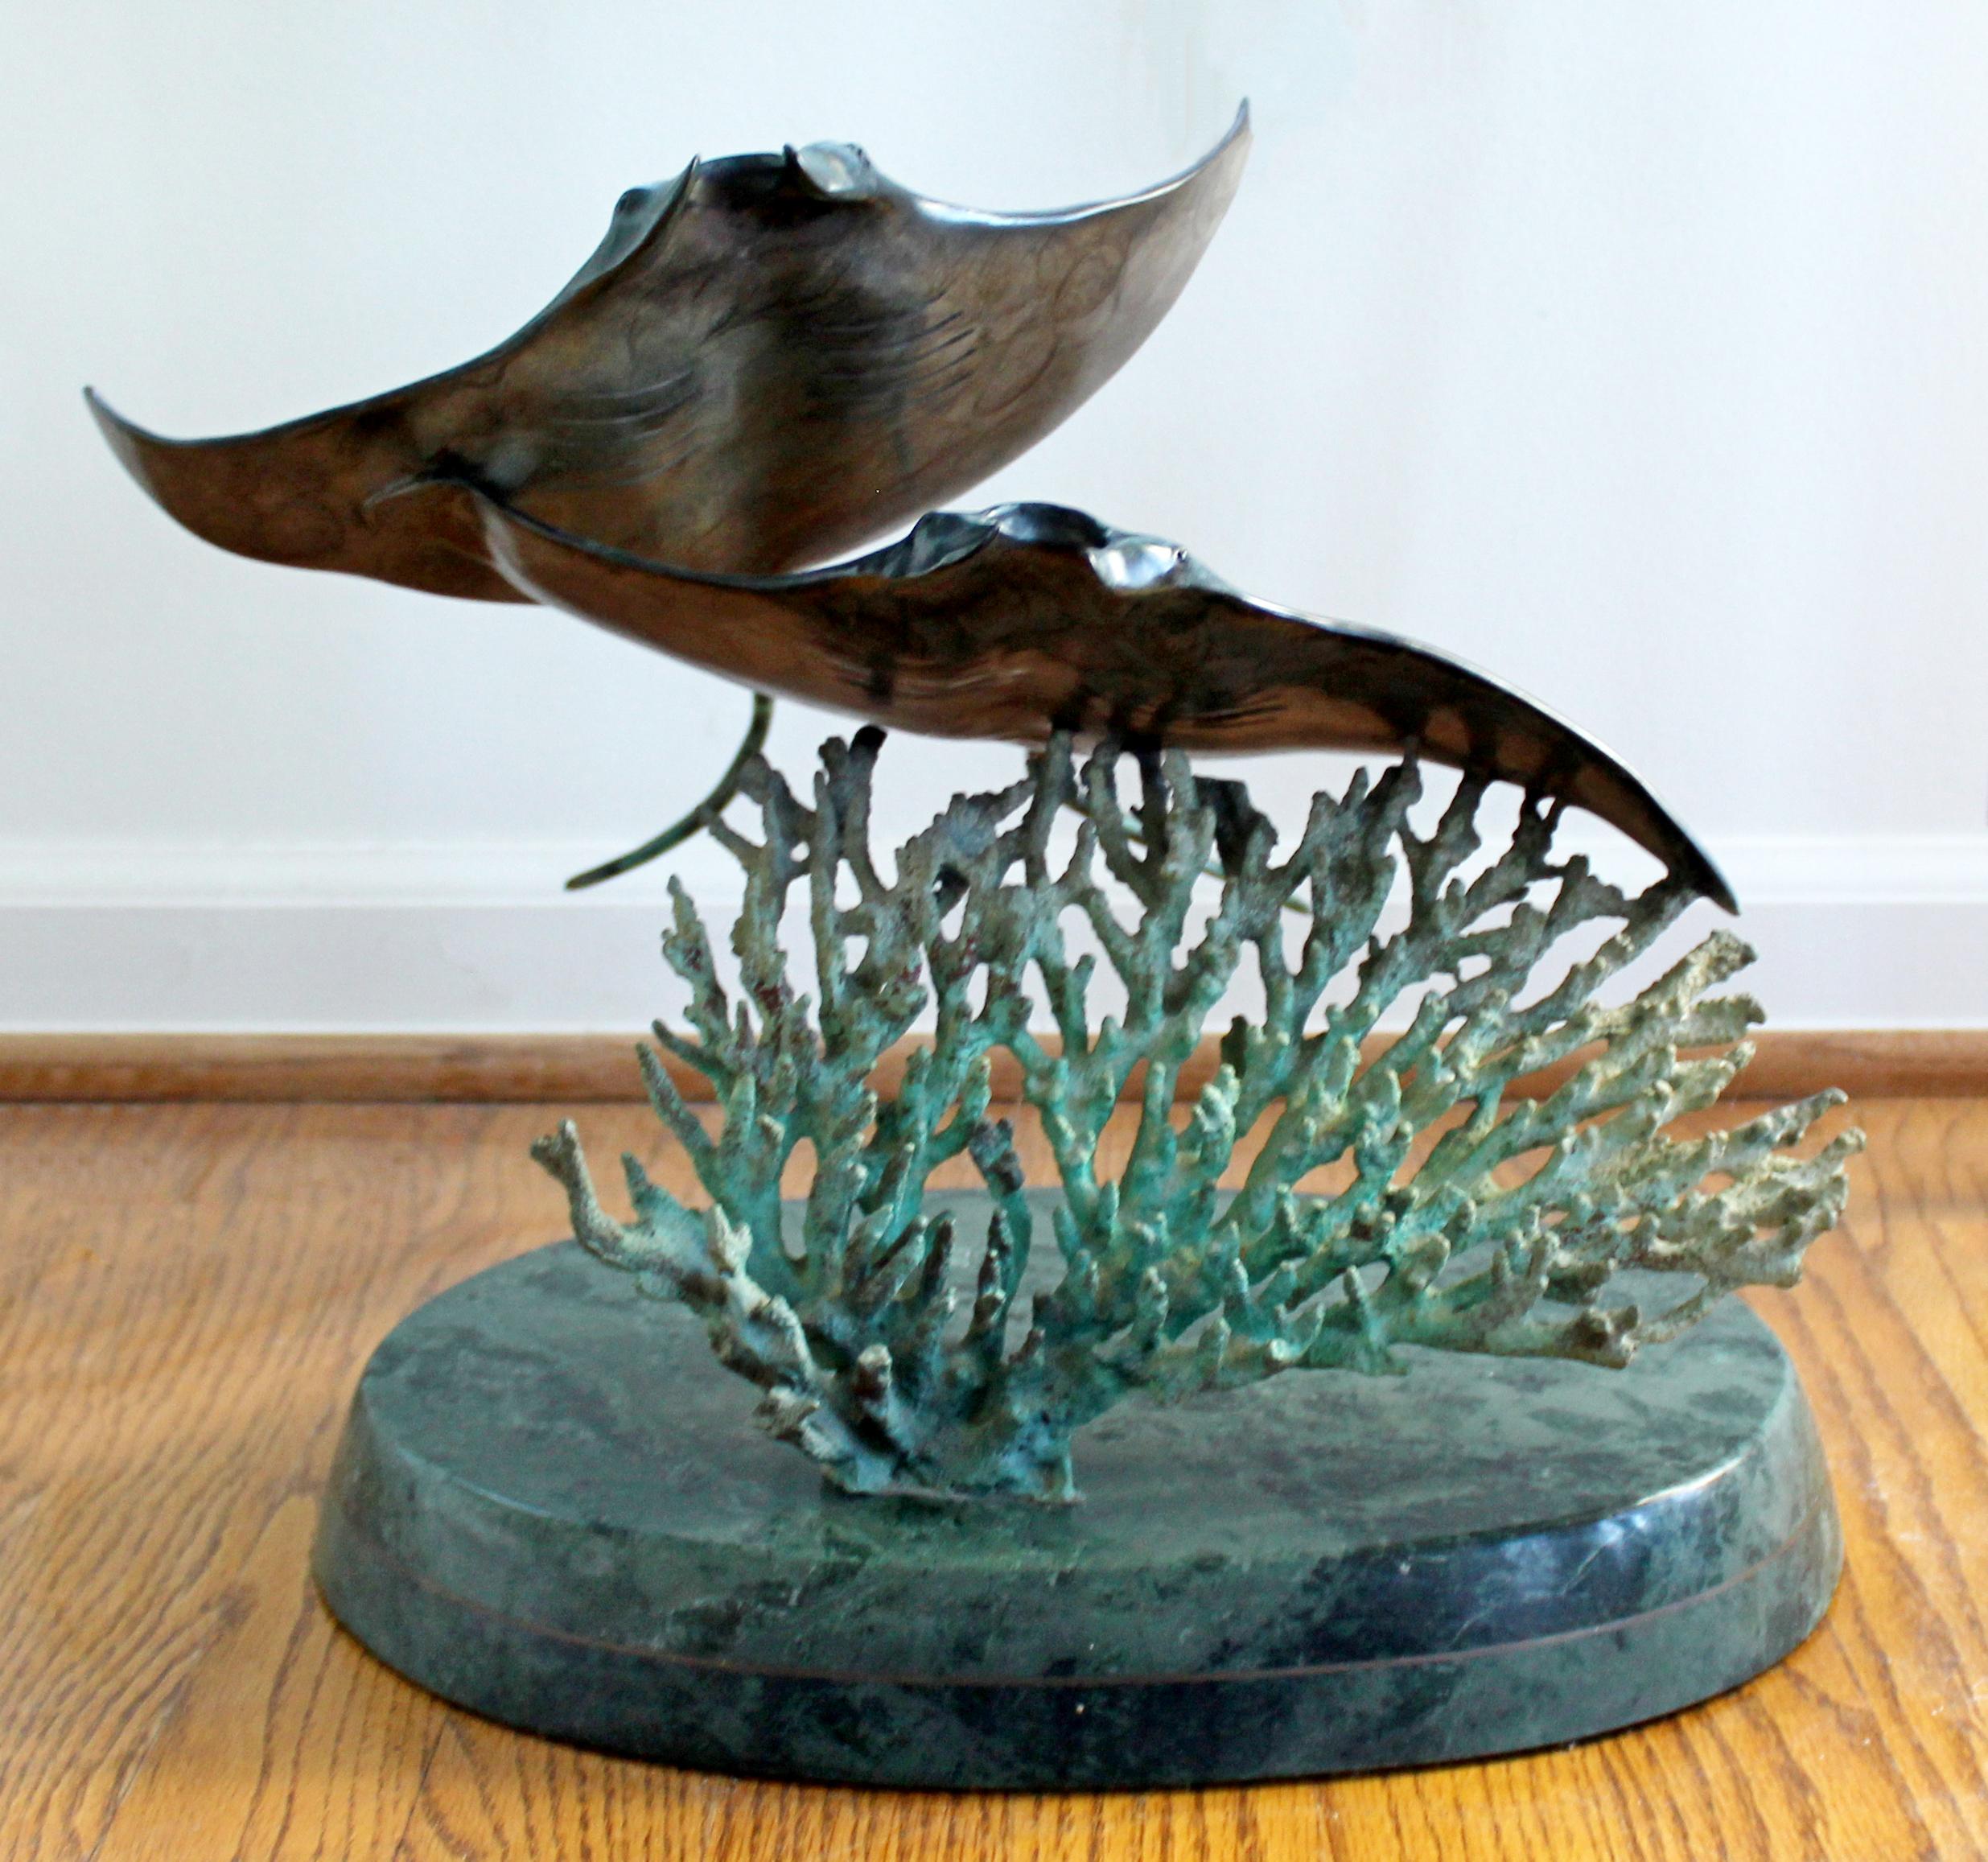 For your consideration is an incredible, bronze floor sculpture of a pair of manta rays, signed Wyland, numbered 40/300, circa 1991. In excellent condition. The dimensions are 17